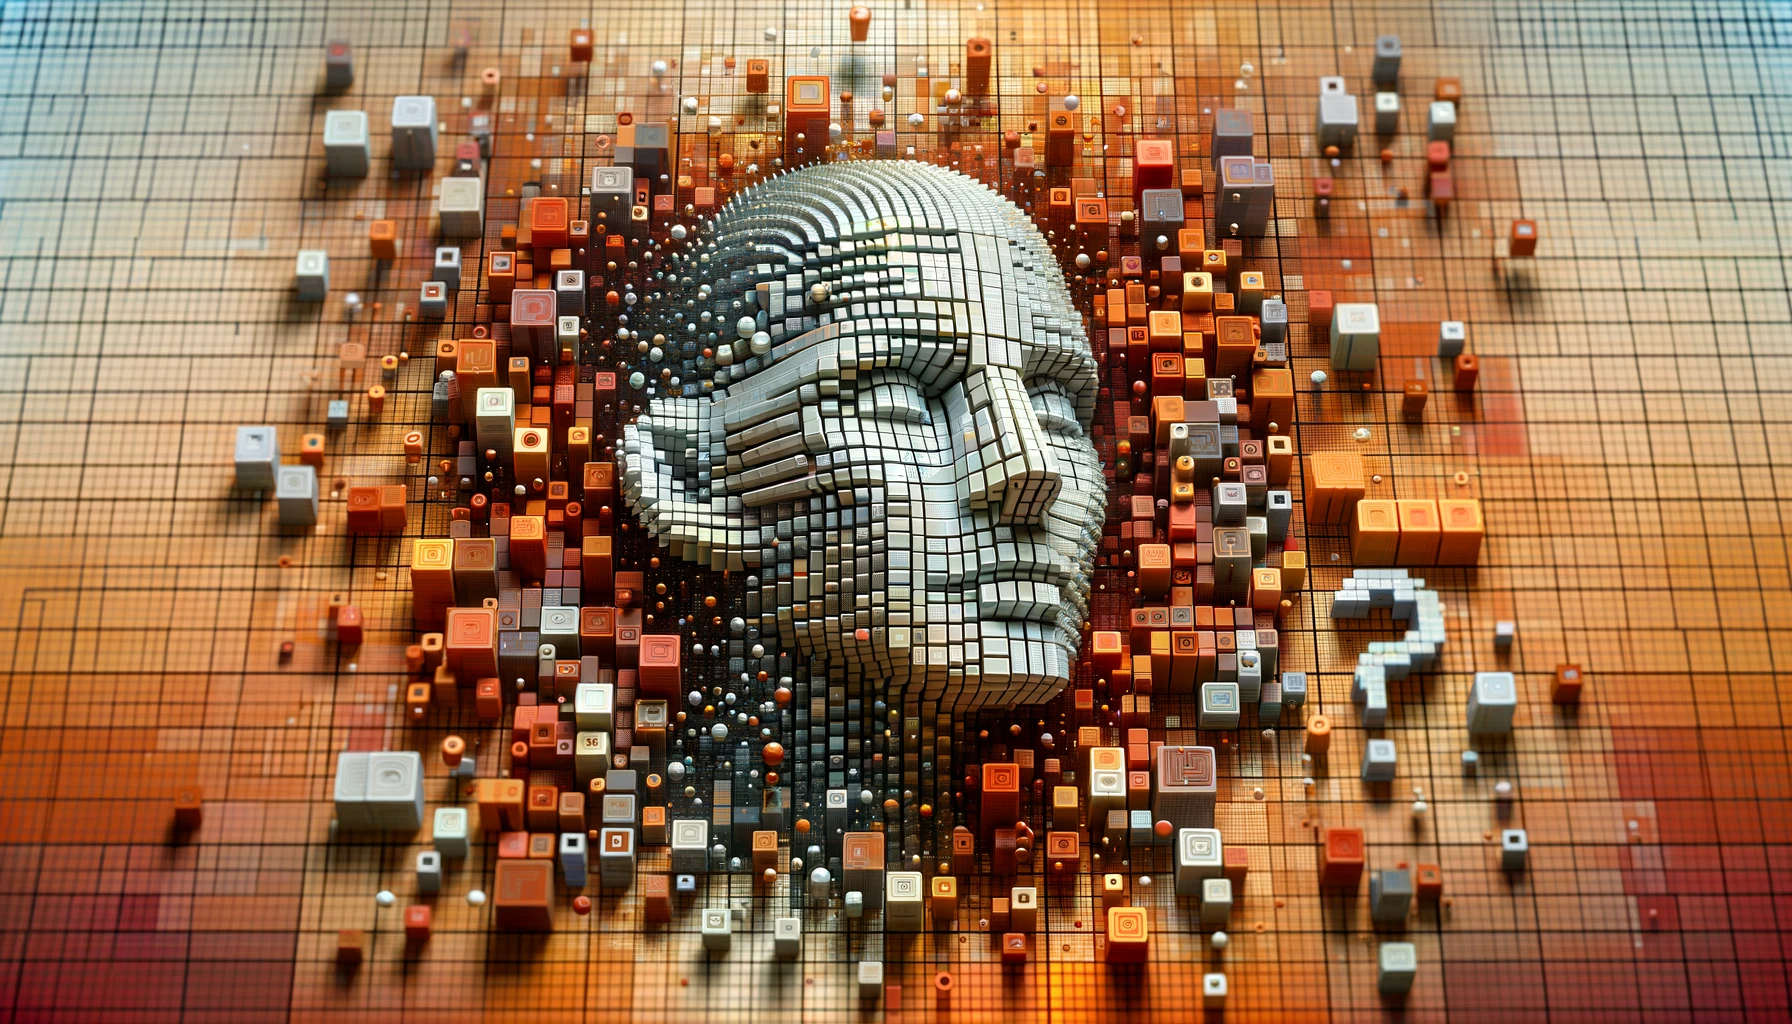 "Wide illustration representing an article about the ethics of AI in content creation. The image features a 3D block matrix, with blocks coloured in burnt orange (#D97706) and lighter tones forming a grid pattern on a #383850 background. Various-sized blocks float above the matrix to give a sense of depth and dimension, echoing voxel art and digital abstraction. Integrate subtle visual elements that suggest AI and human collaboration, such as a faint silhouette of a human head merged with digital patterns or a question mark symbol representing the theme of authorship and creativity in AI. The composition should be dynamic yet maintain the futuristic and abstract aesthetic of the previous images in the series."